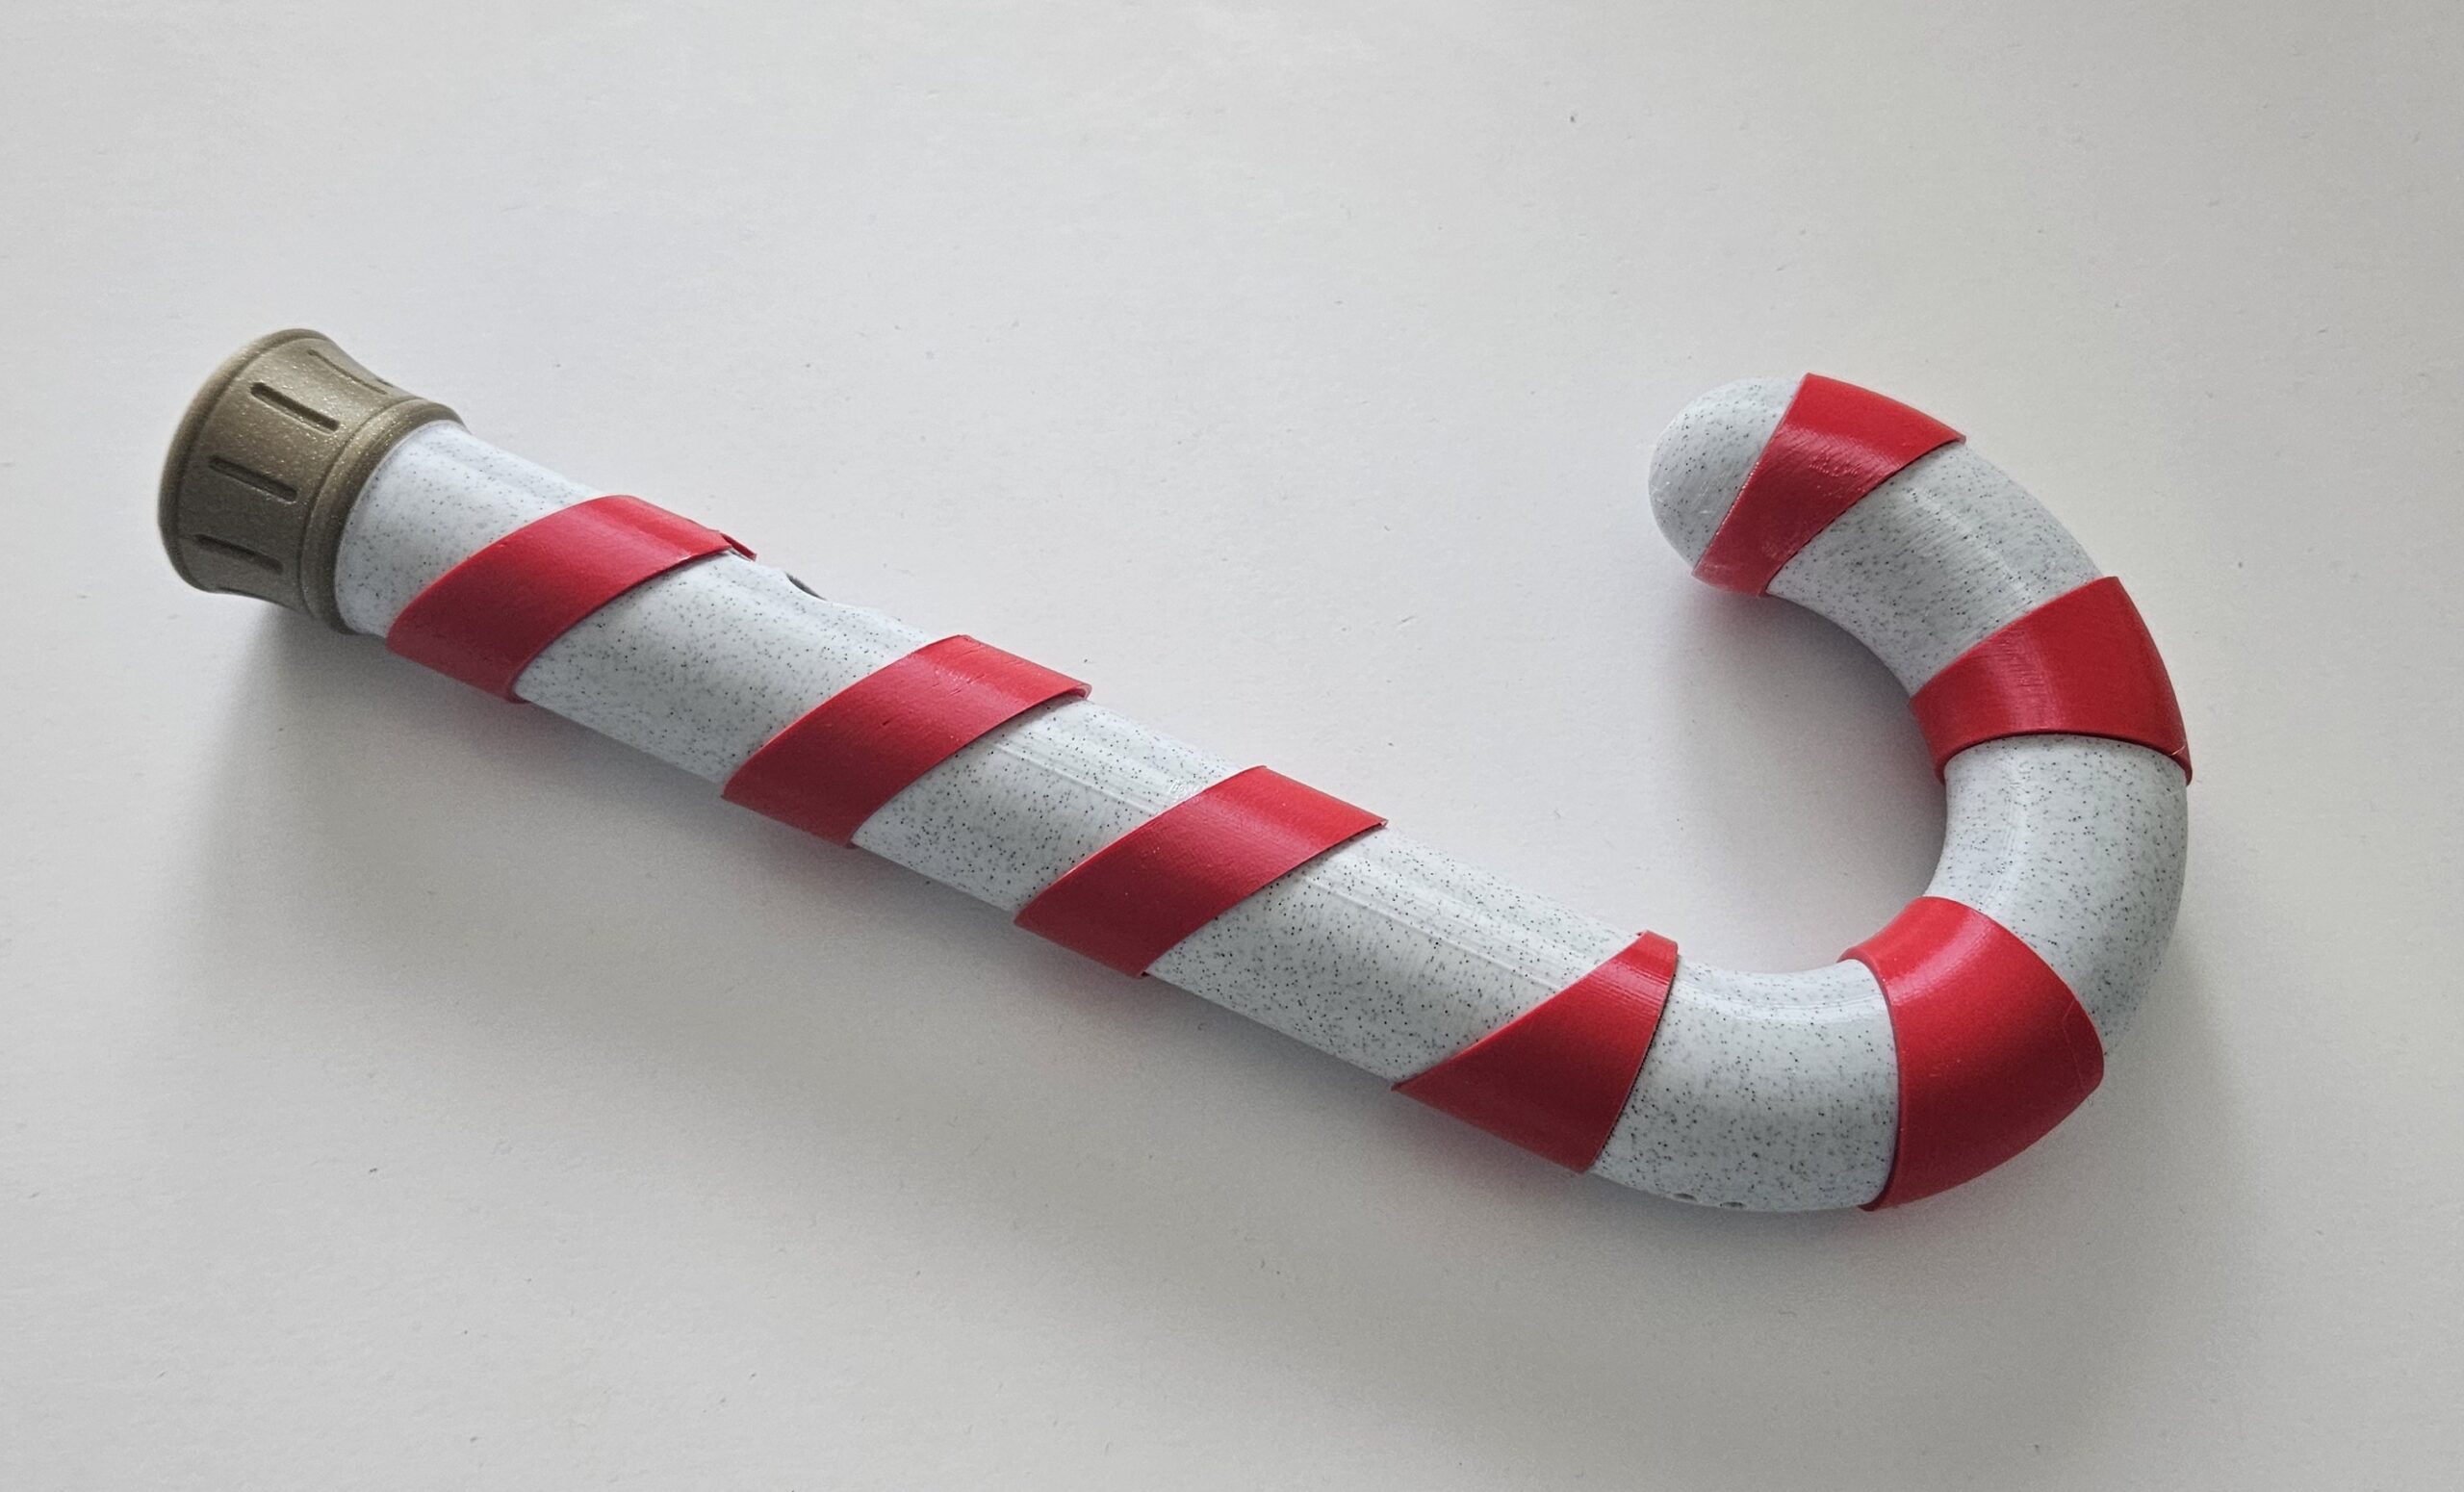 raw photo of a candy cane functional lightsaber made by mystery makers